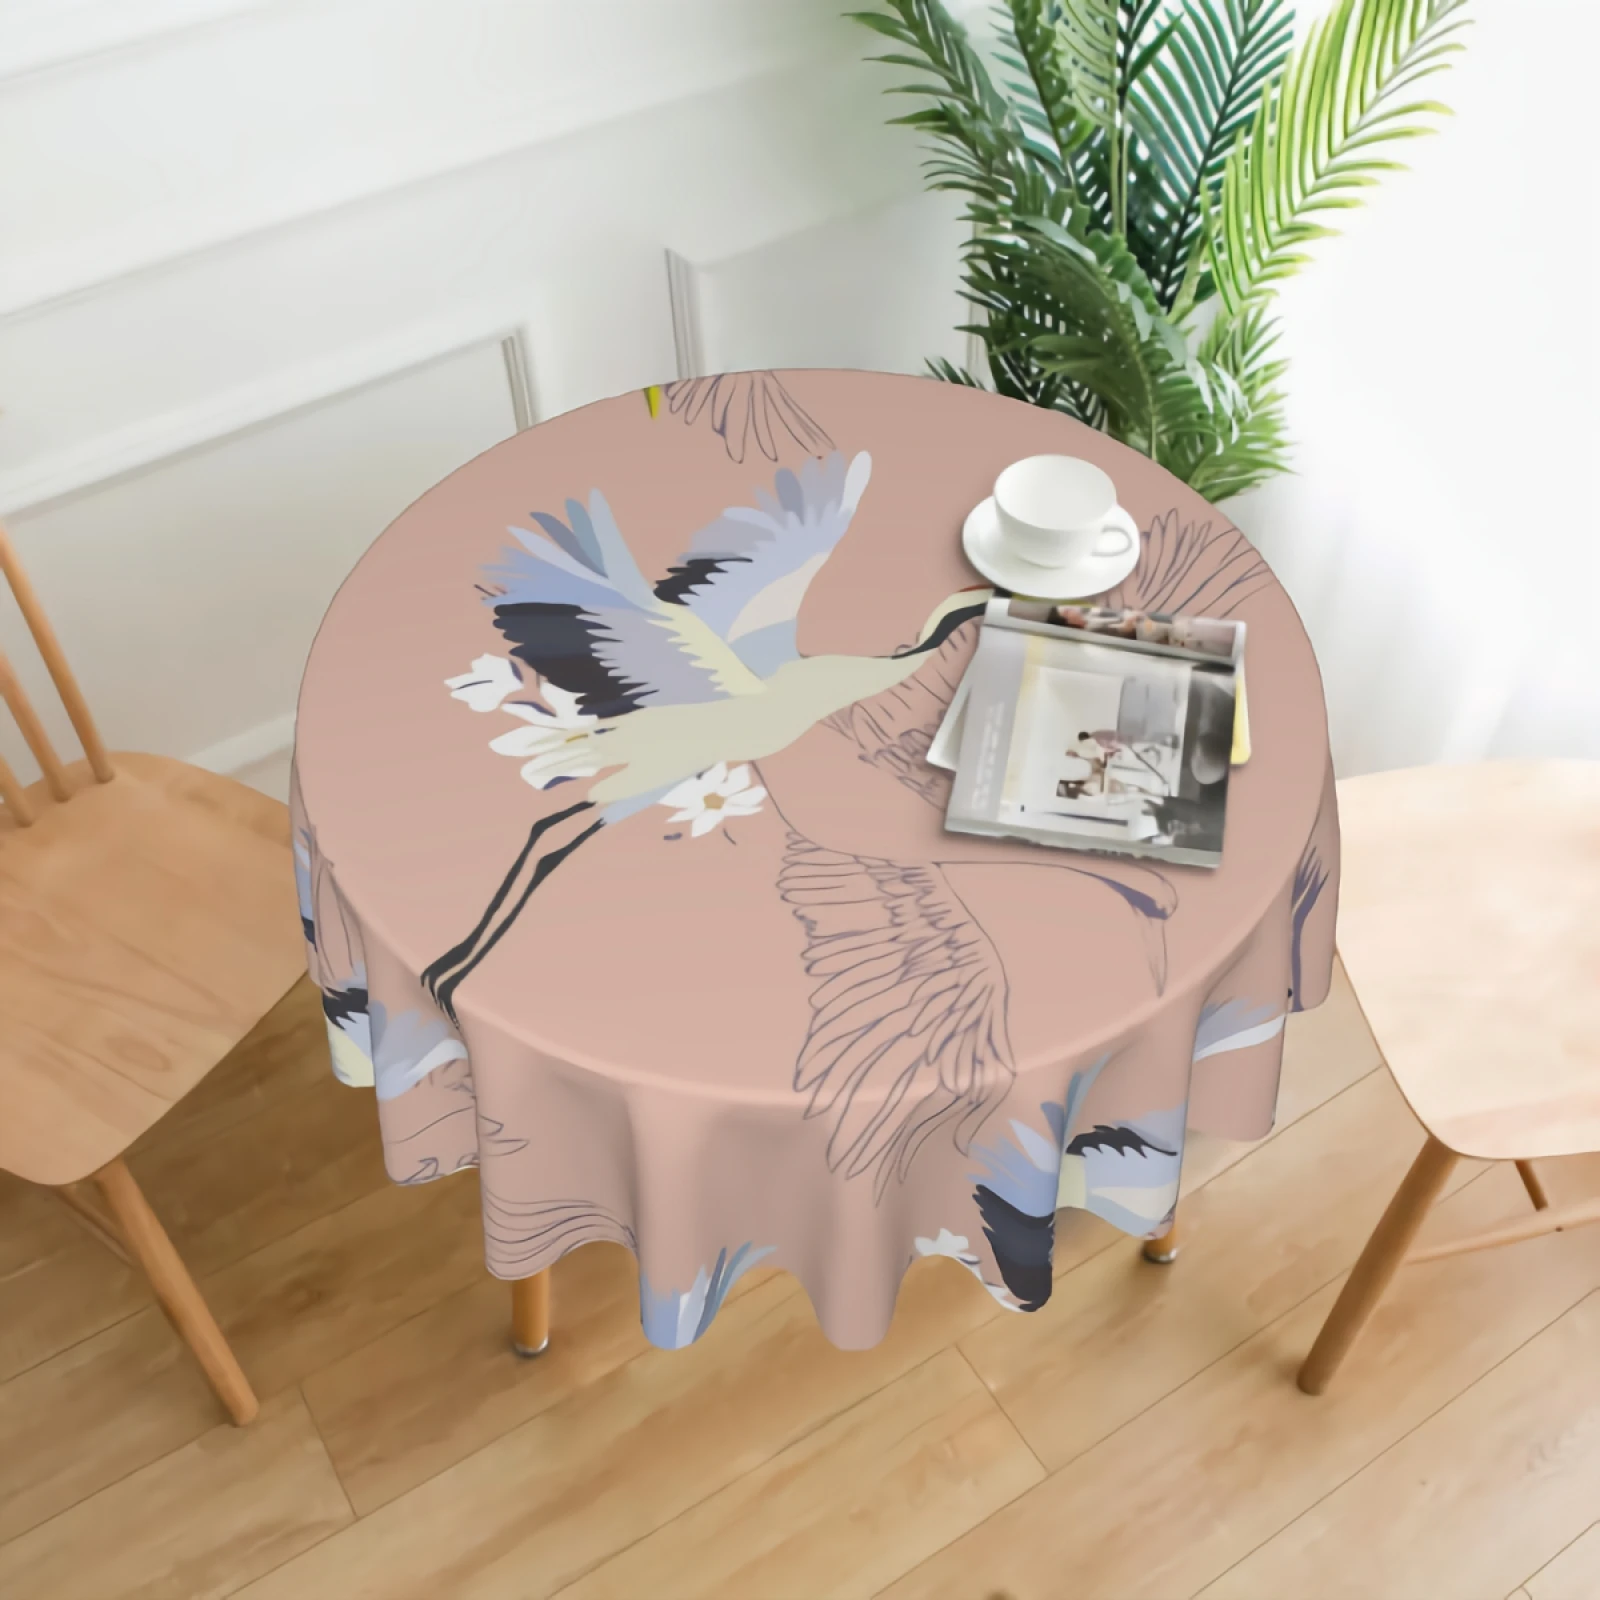 

Flying Crane Birds Round Tablecloth Waterproof Watercolor Crane With Flowers Table Cloth Wrinkle Free Decorative Tablecloths